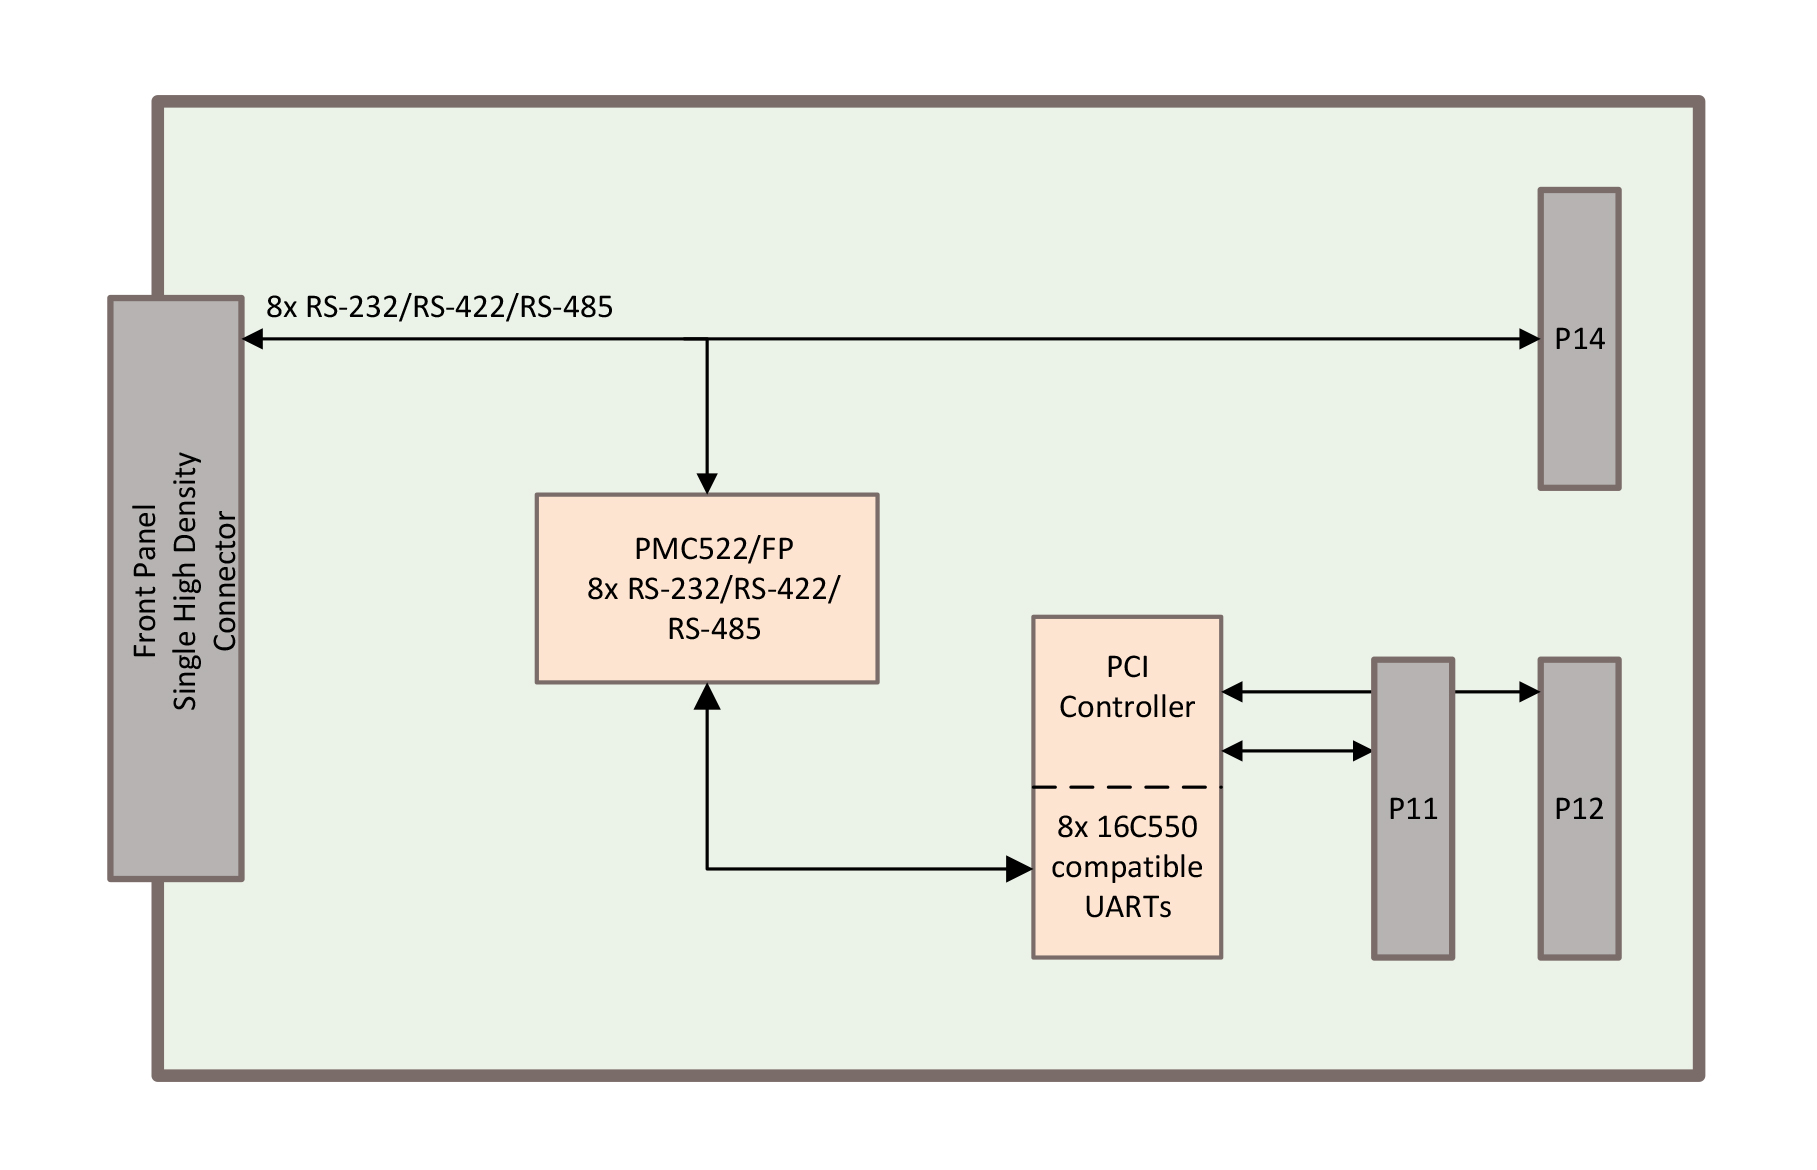 Abaco's PMC522 FP Serial Controller diagram